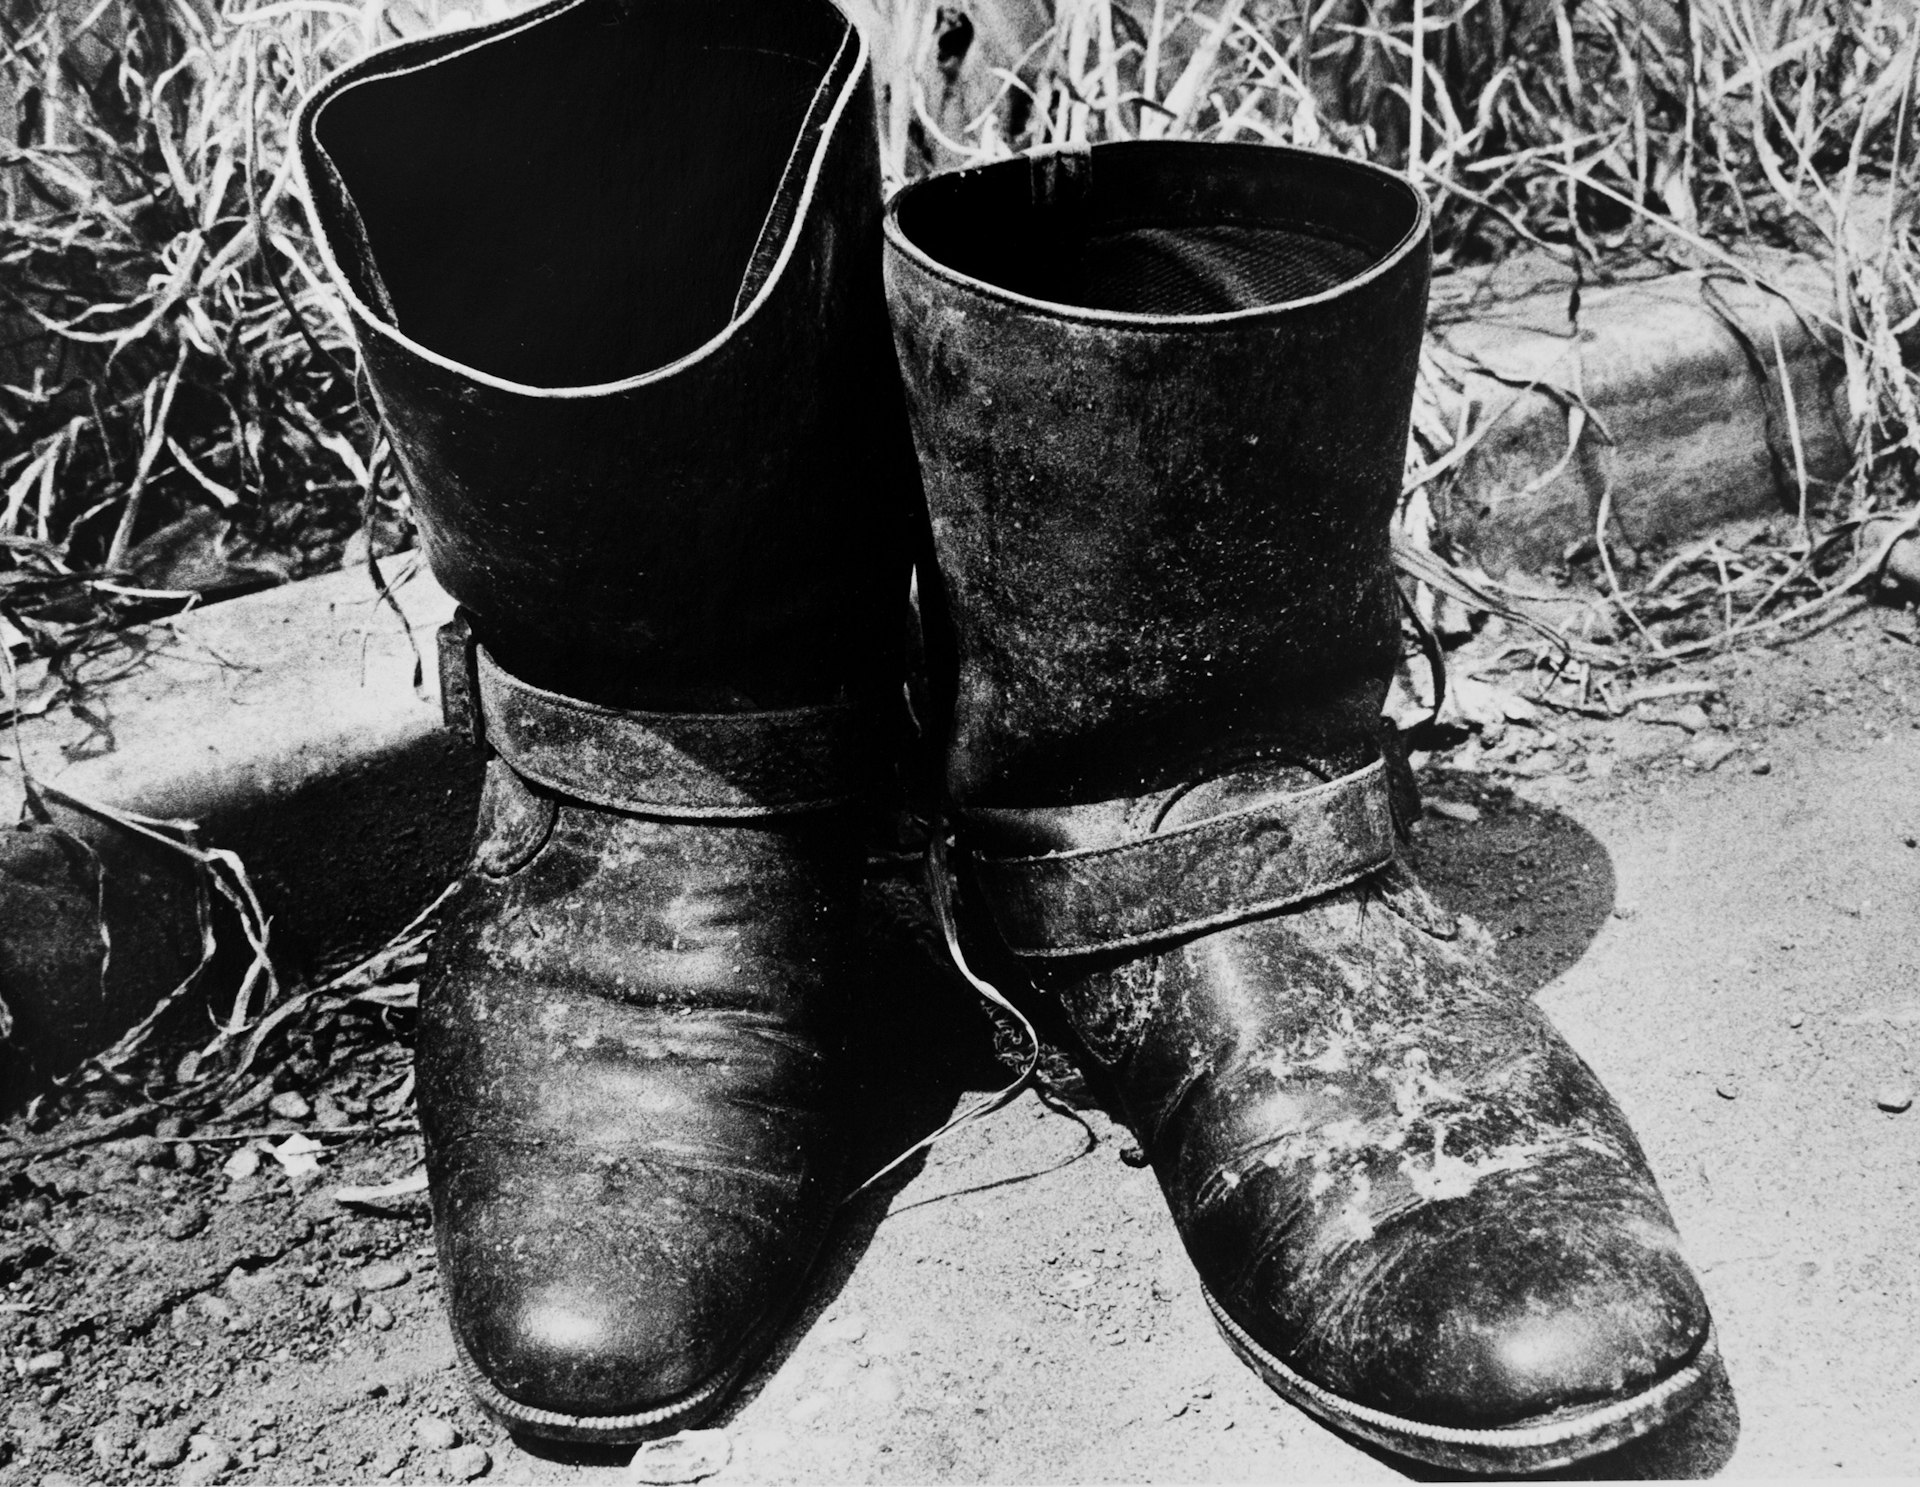 “Light and Shadow: On the Road (Boots)”, 1981, 1981